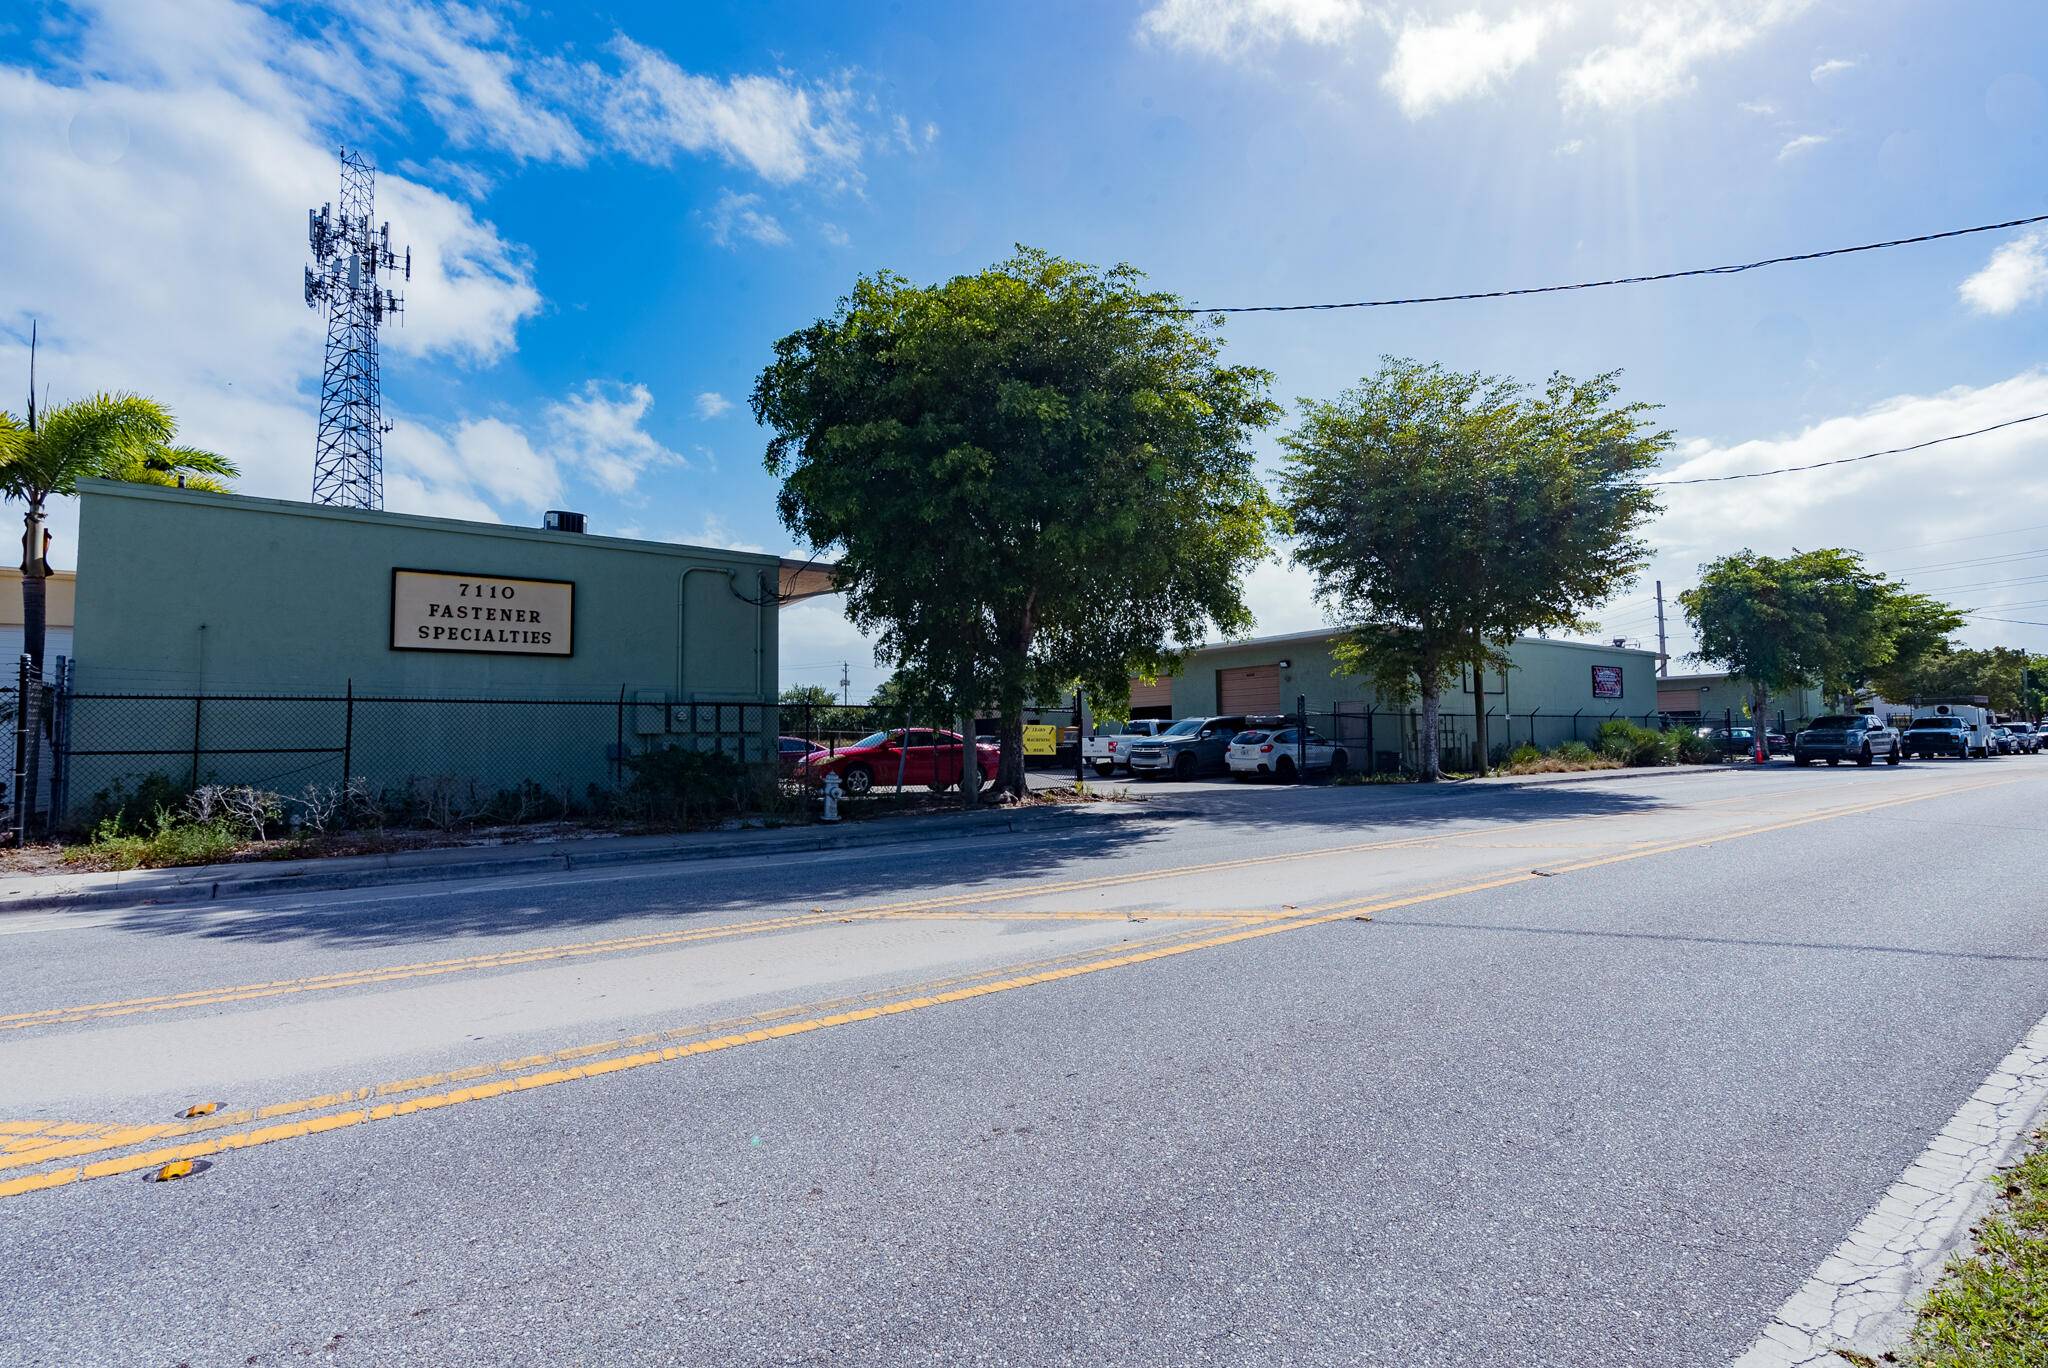 Great Warehouse Office Space for sale on the highly sought after Georgia Avenue.